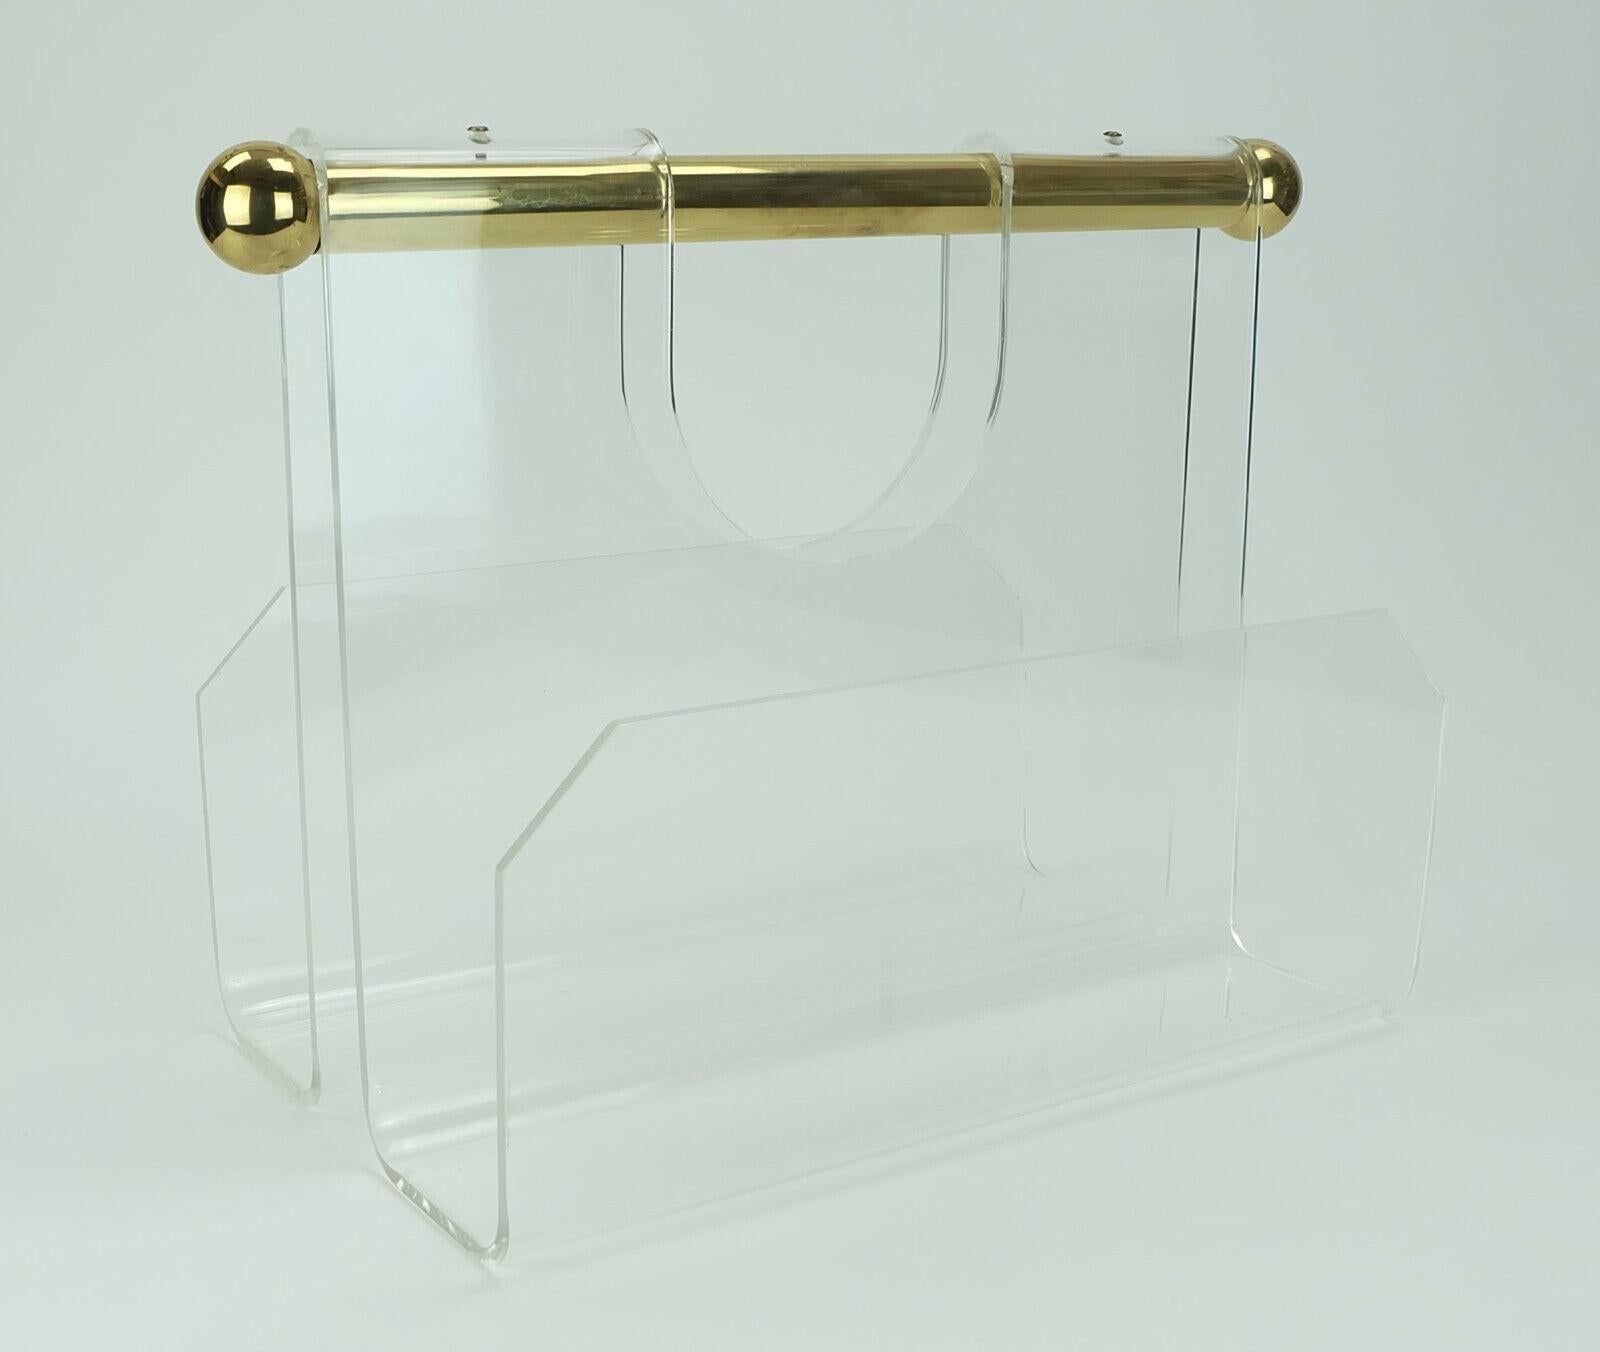 transparent lucite acrylic MAGAZINE RACK 1970s 1980s space age For Sale 4